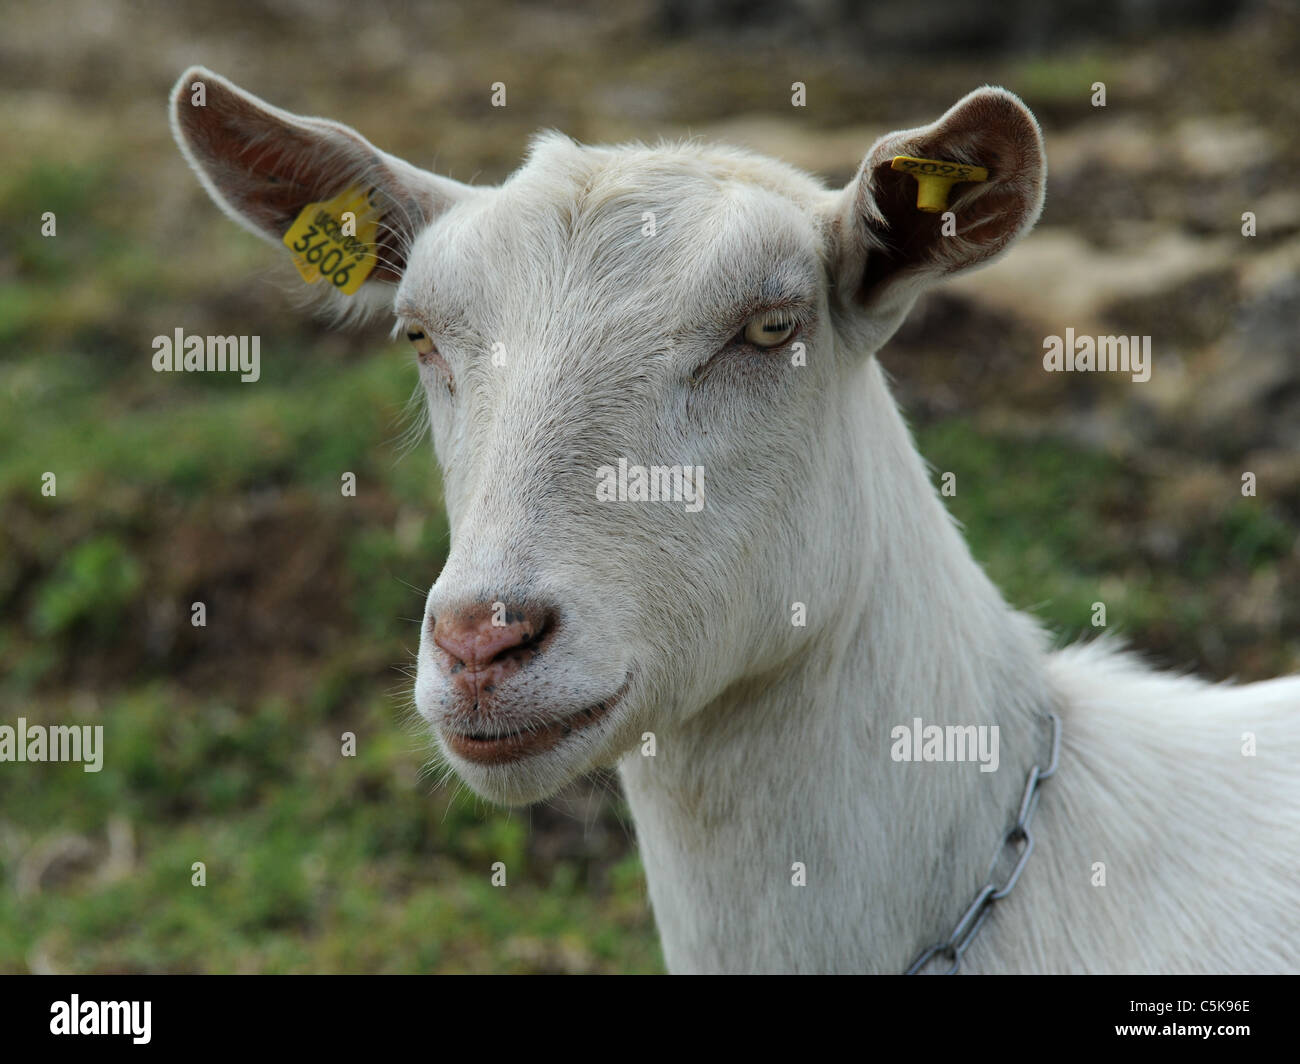 A white goat called a British Saanen with a clean white face. Stock Photo